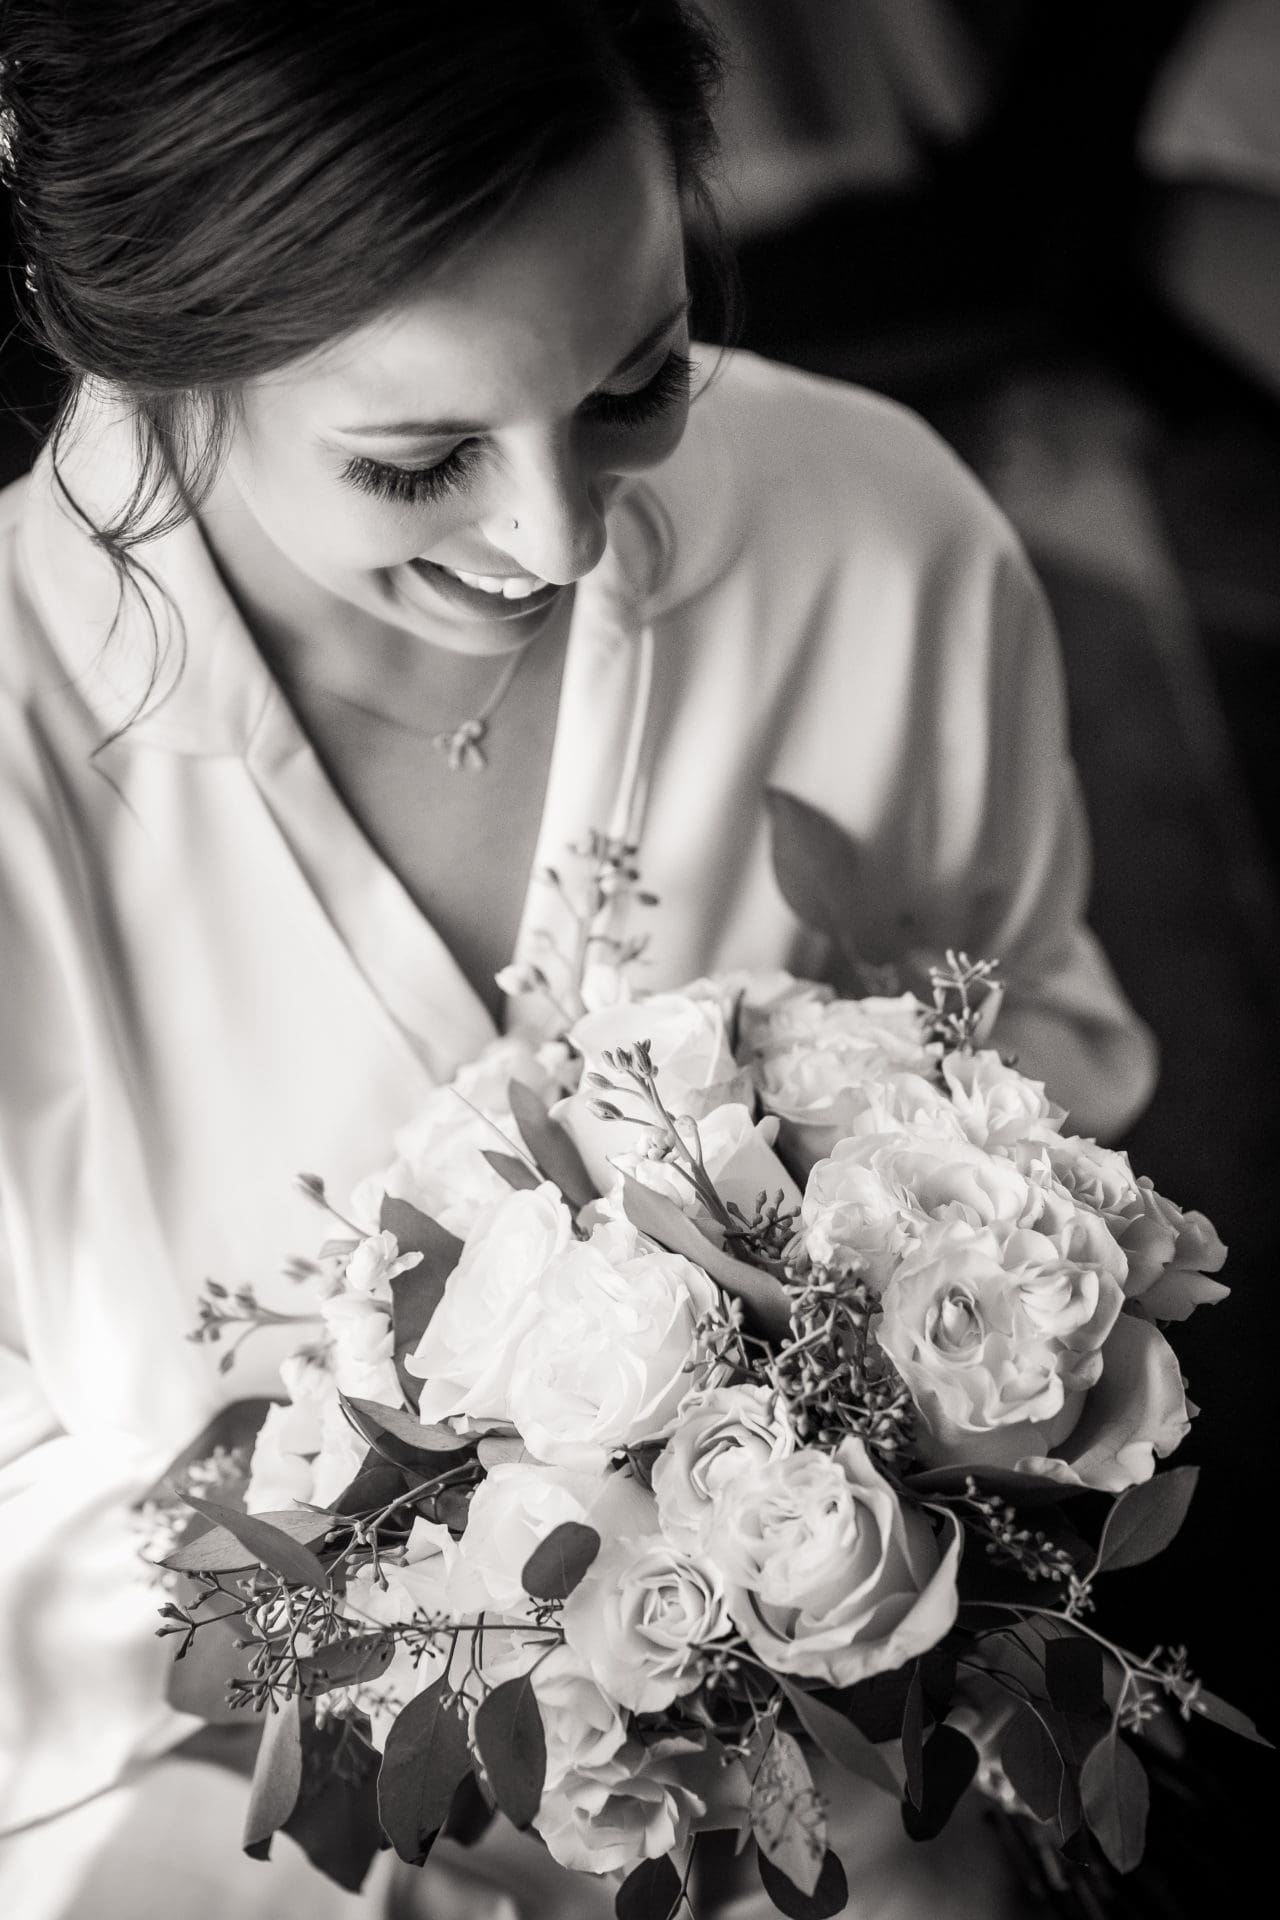 Bride getting ready in black and white